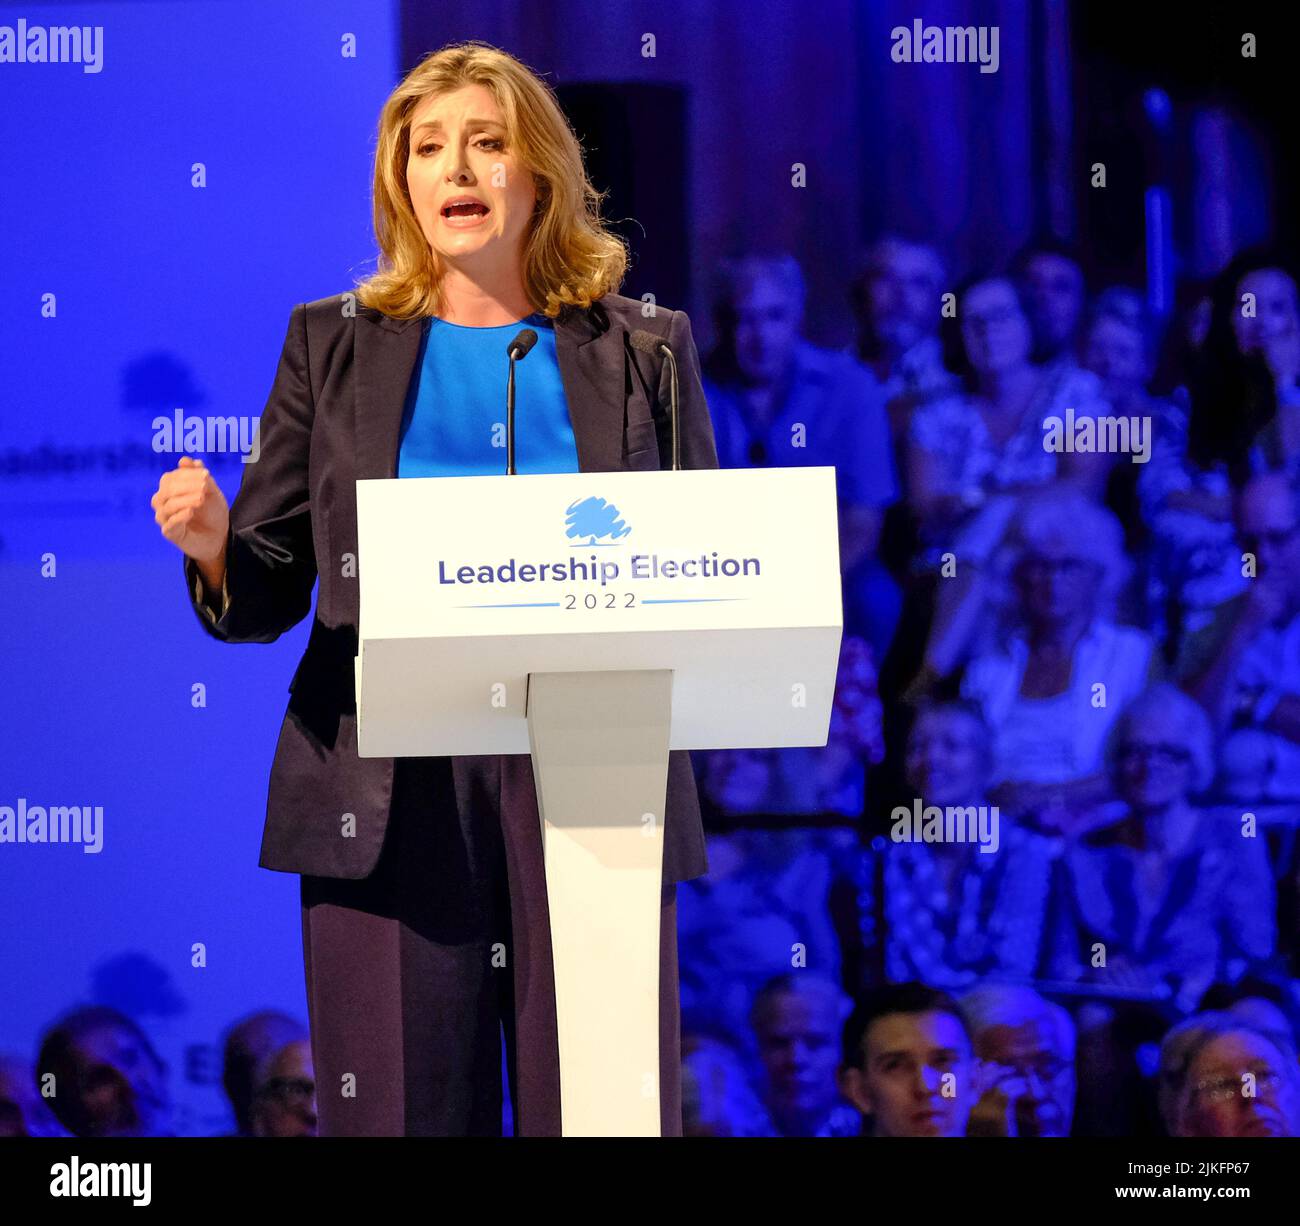 Exeter Devon UK. 01/08/2022, 2nd Conservative Party Hustings. Tory members gathered in the Great Hall at Exeter University.Penny Mordaunt speaking in support of Liz Truss for PM. Credit: charlie bryan/Alamy Live News Stock Photo